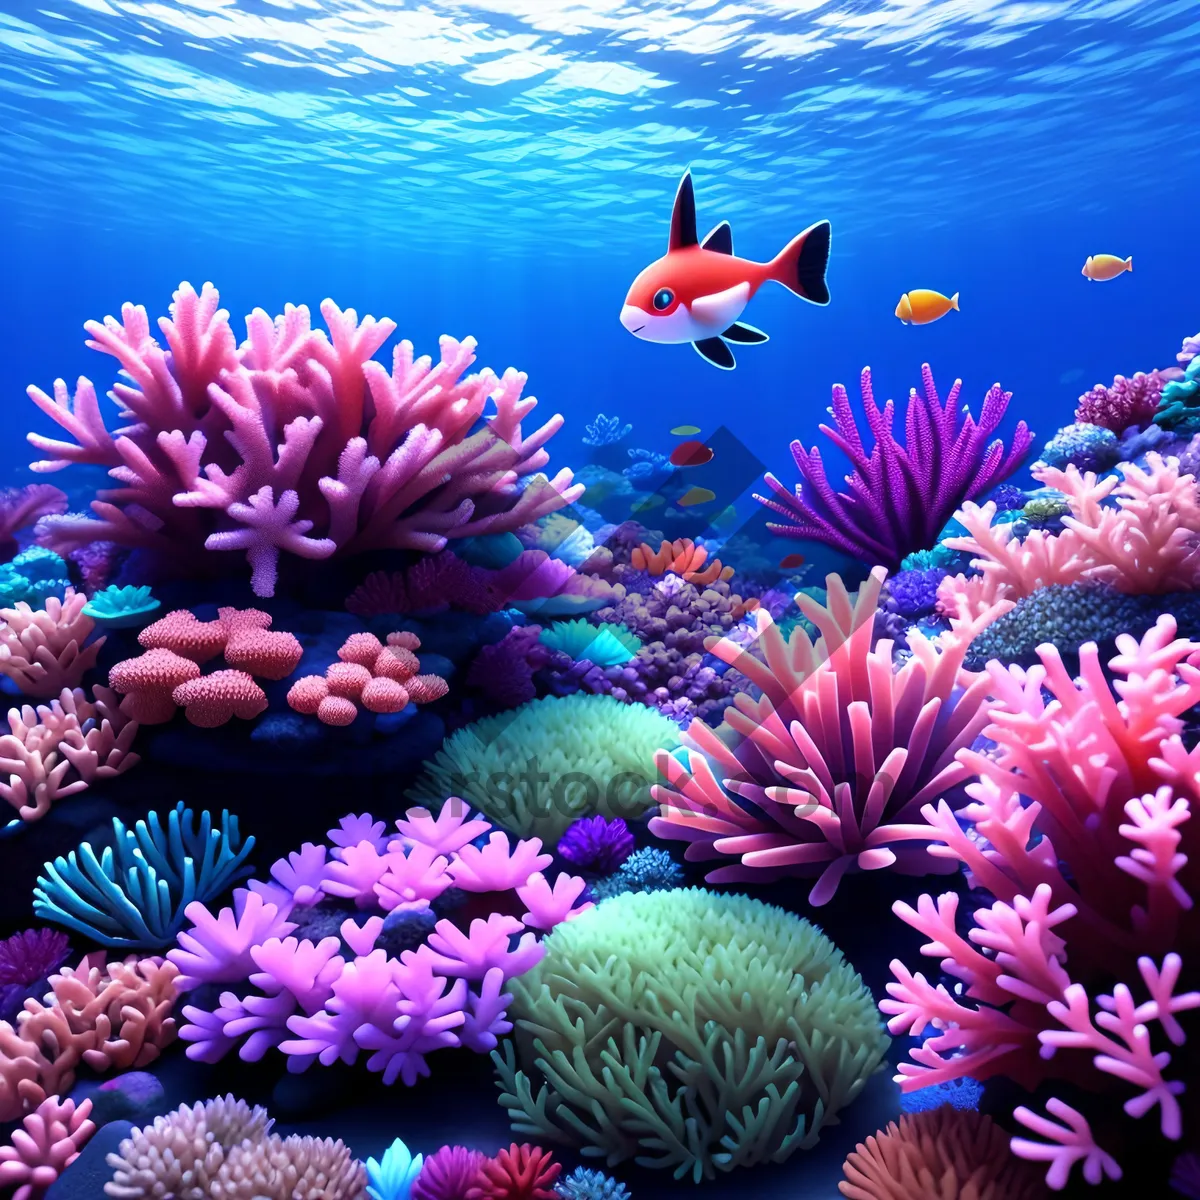 Picture of Coral Reef Wonderland: Brightly Colored Sea Anemone with Exotic Fish